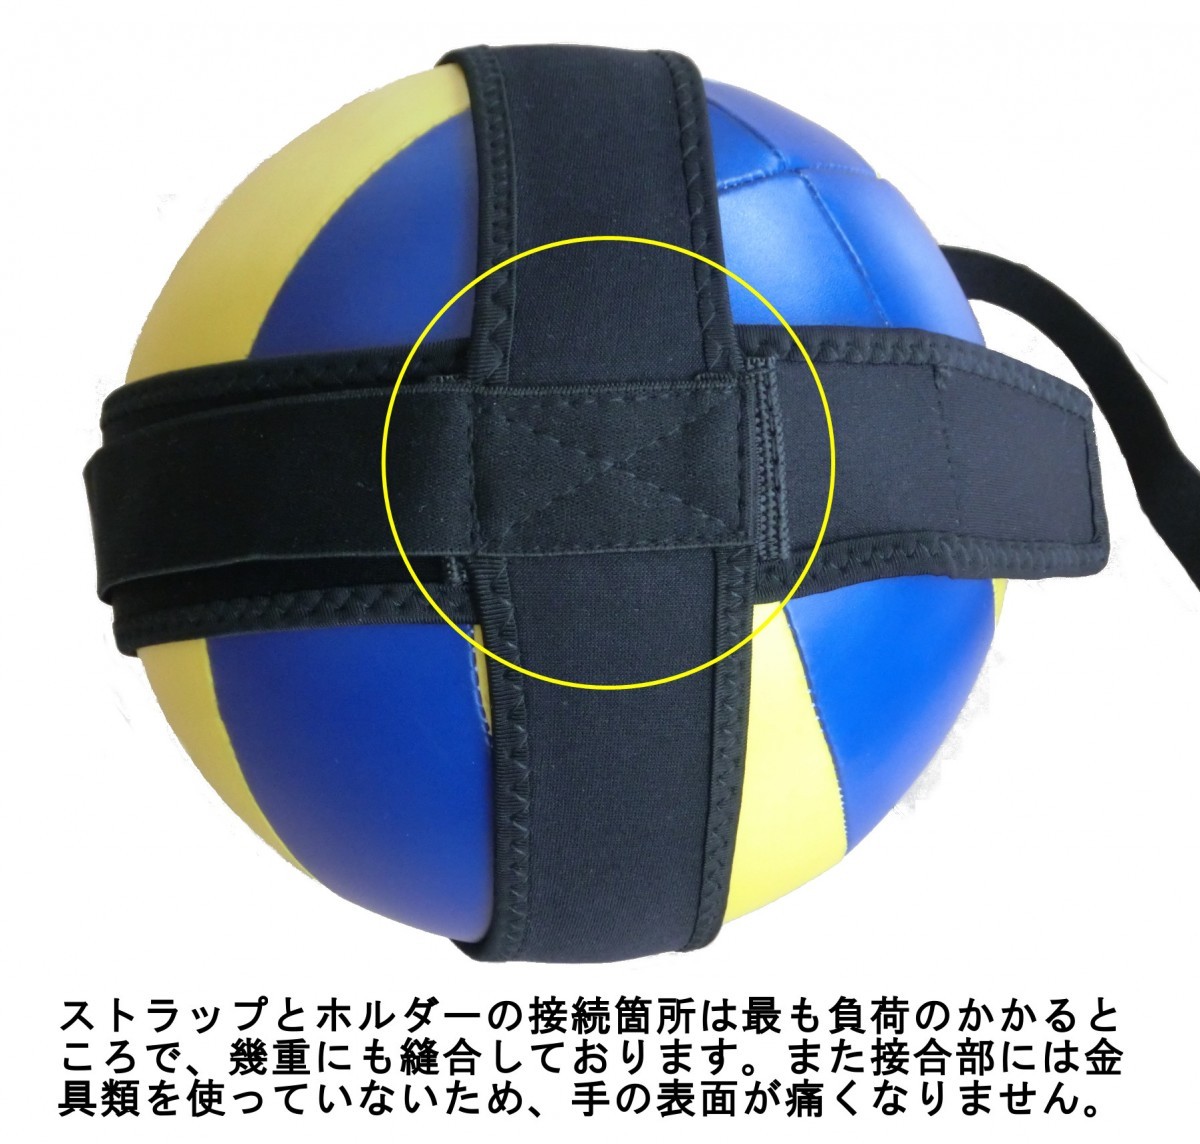  volleyball practice sa-bi strainer 4 number lamp 5 number lamp correspondence safe 240cm strap bare- self .. Saab practice junior high school student junior high school high school university general mama san family woman 